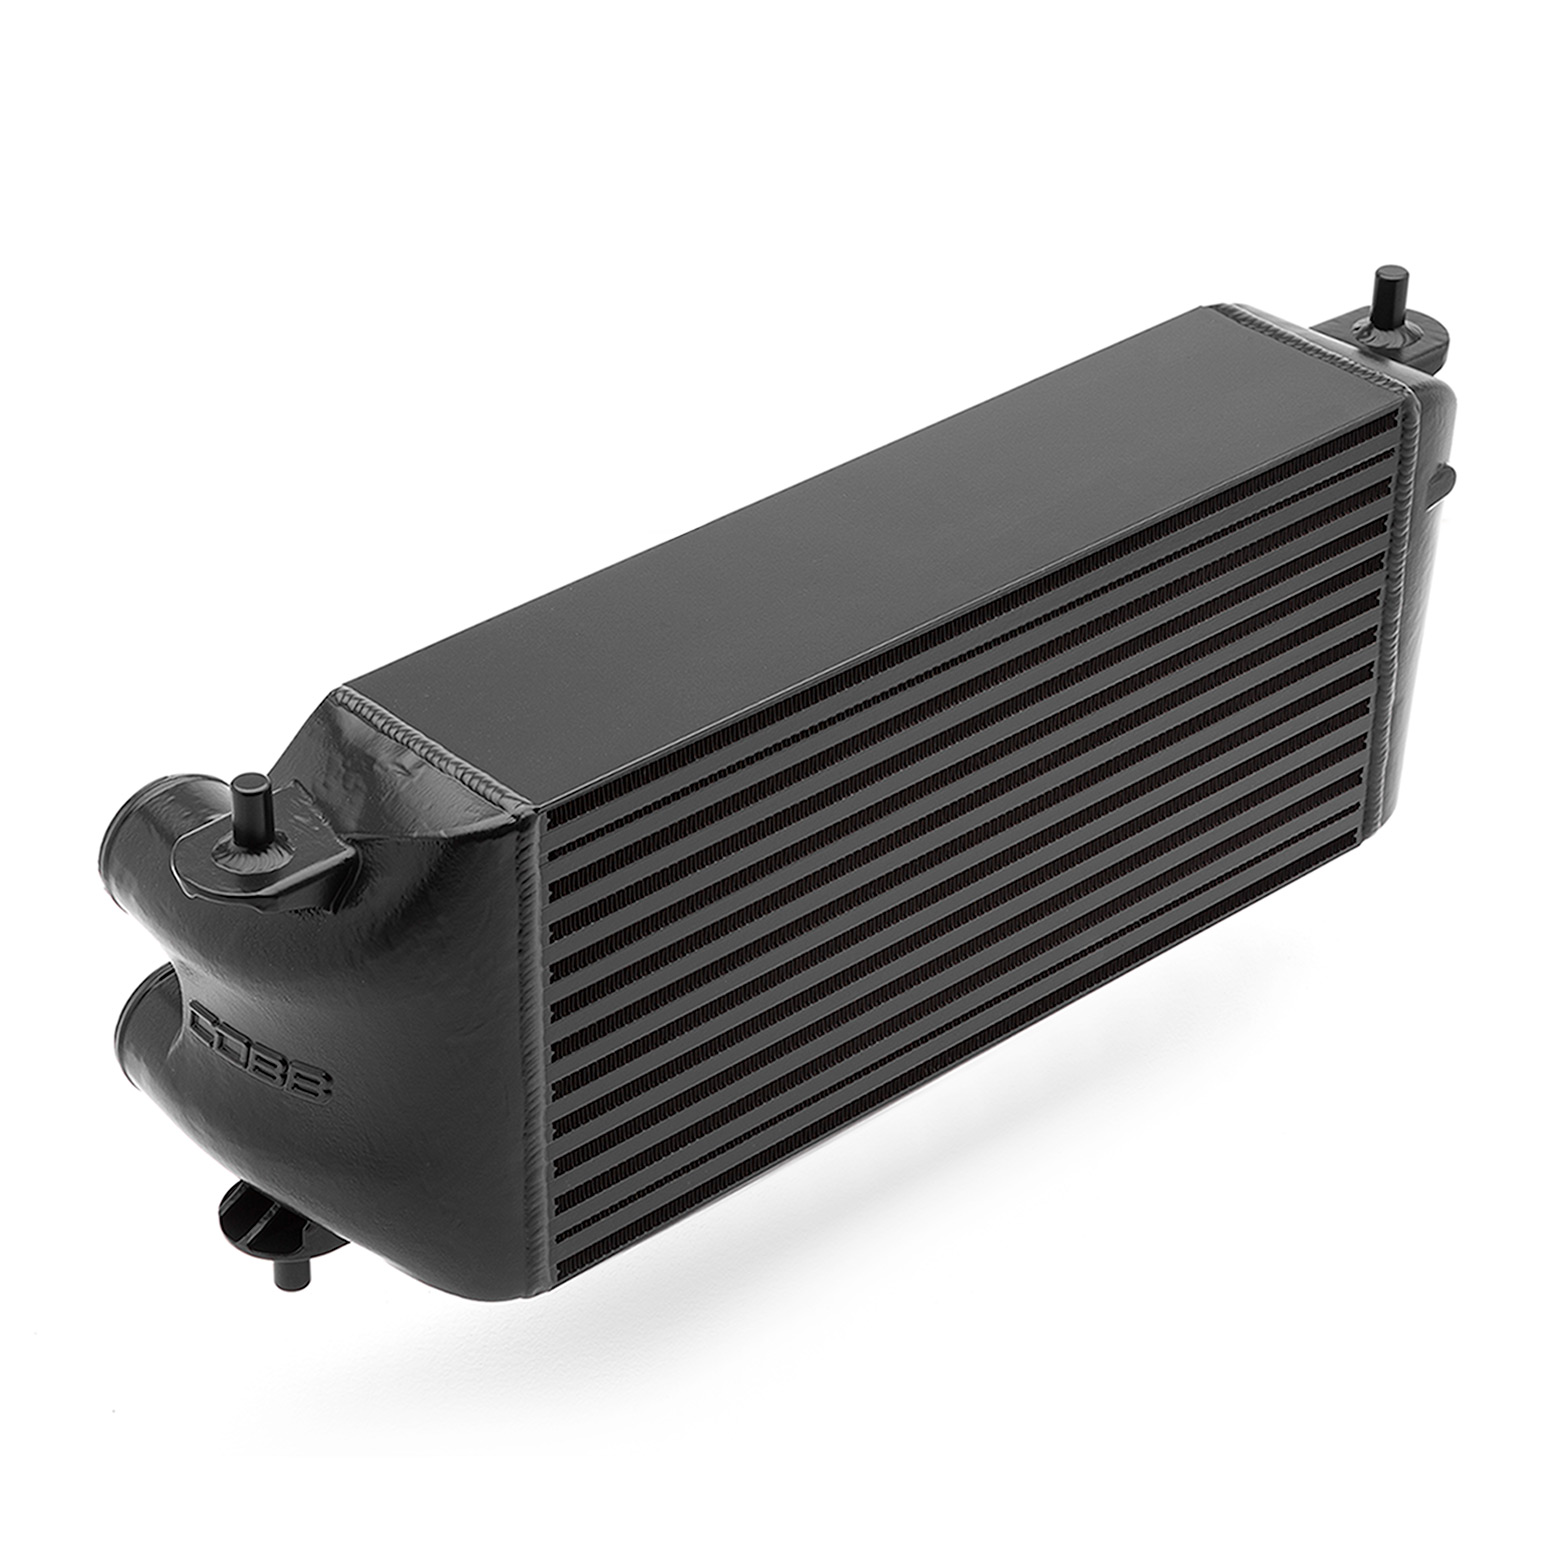 Stage 2 Power Package Black (Factory Location Intercooler) Ford F-150 Raptor 2021-2022